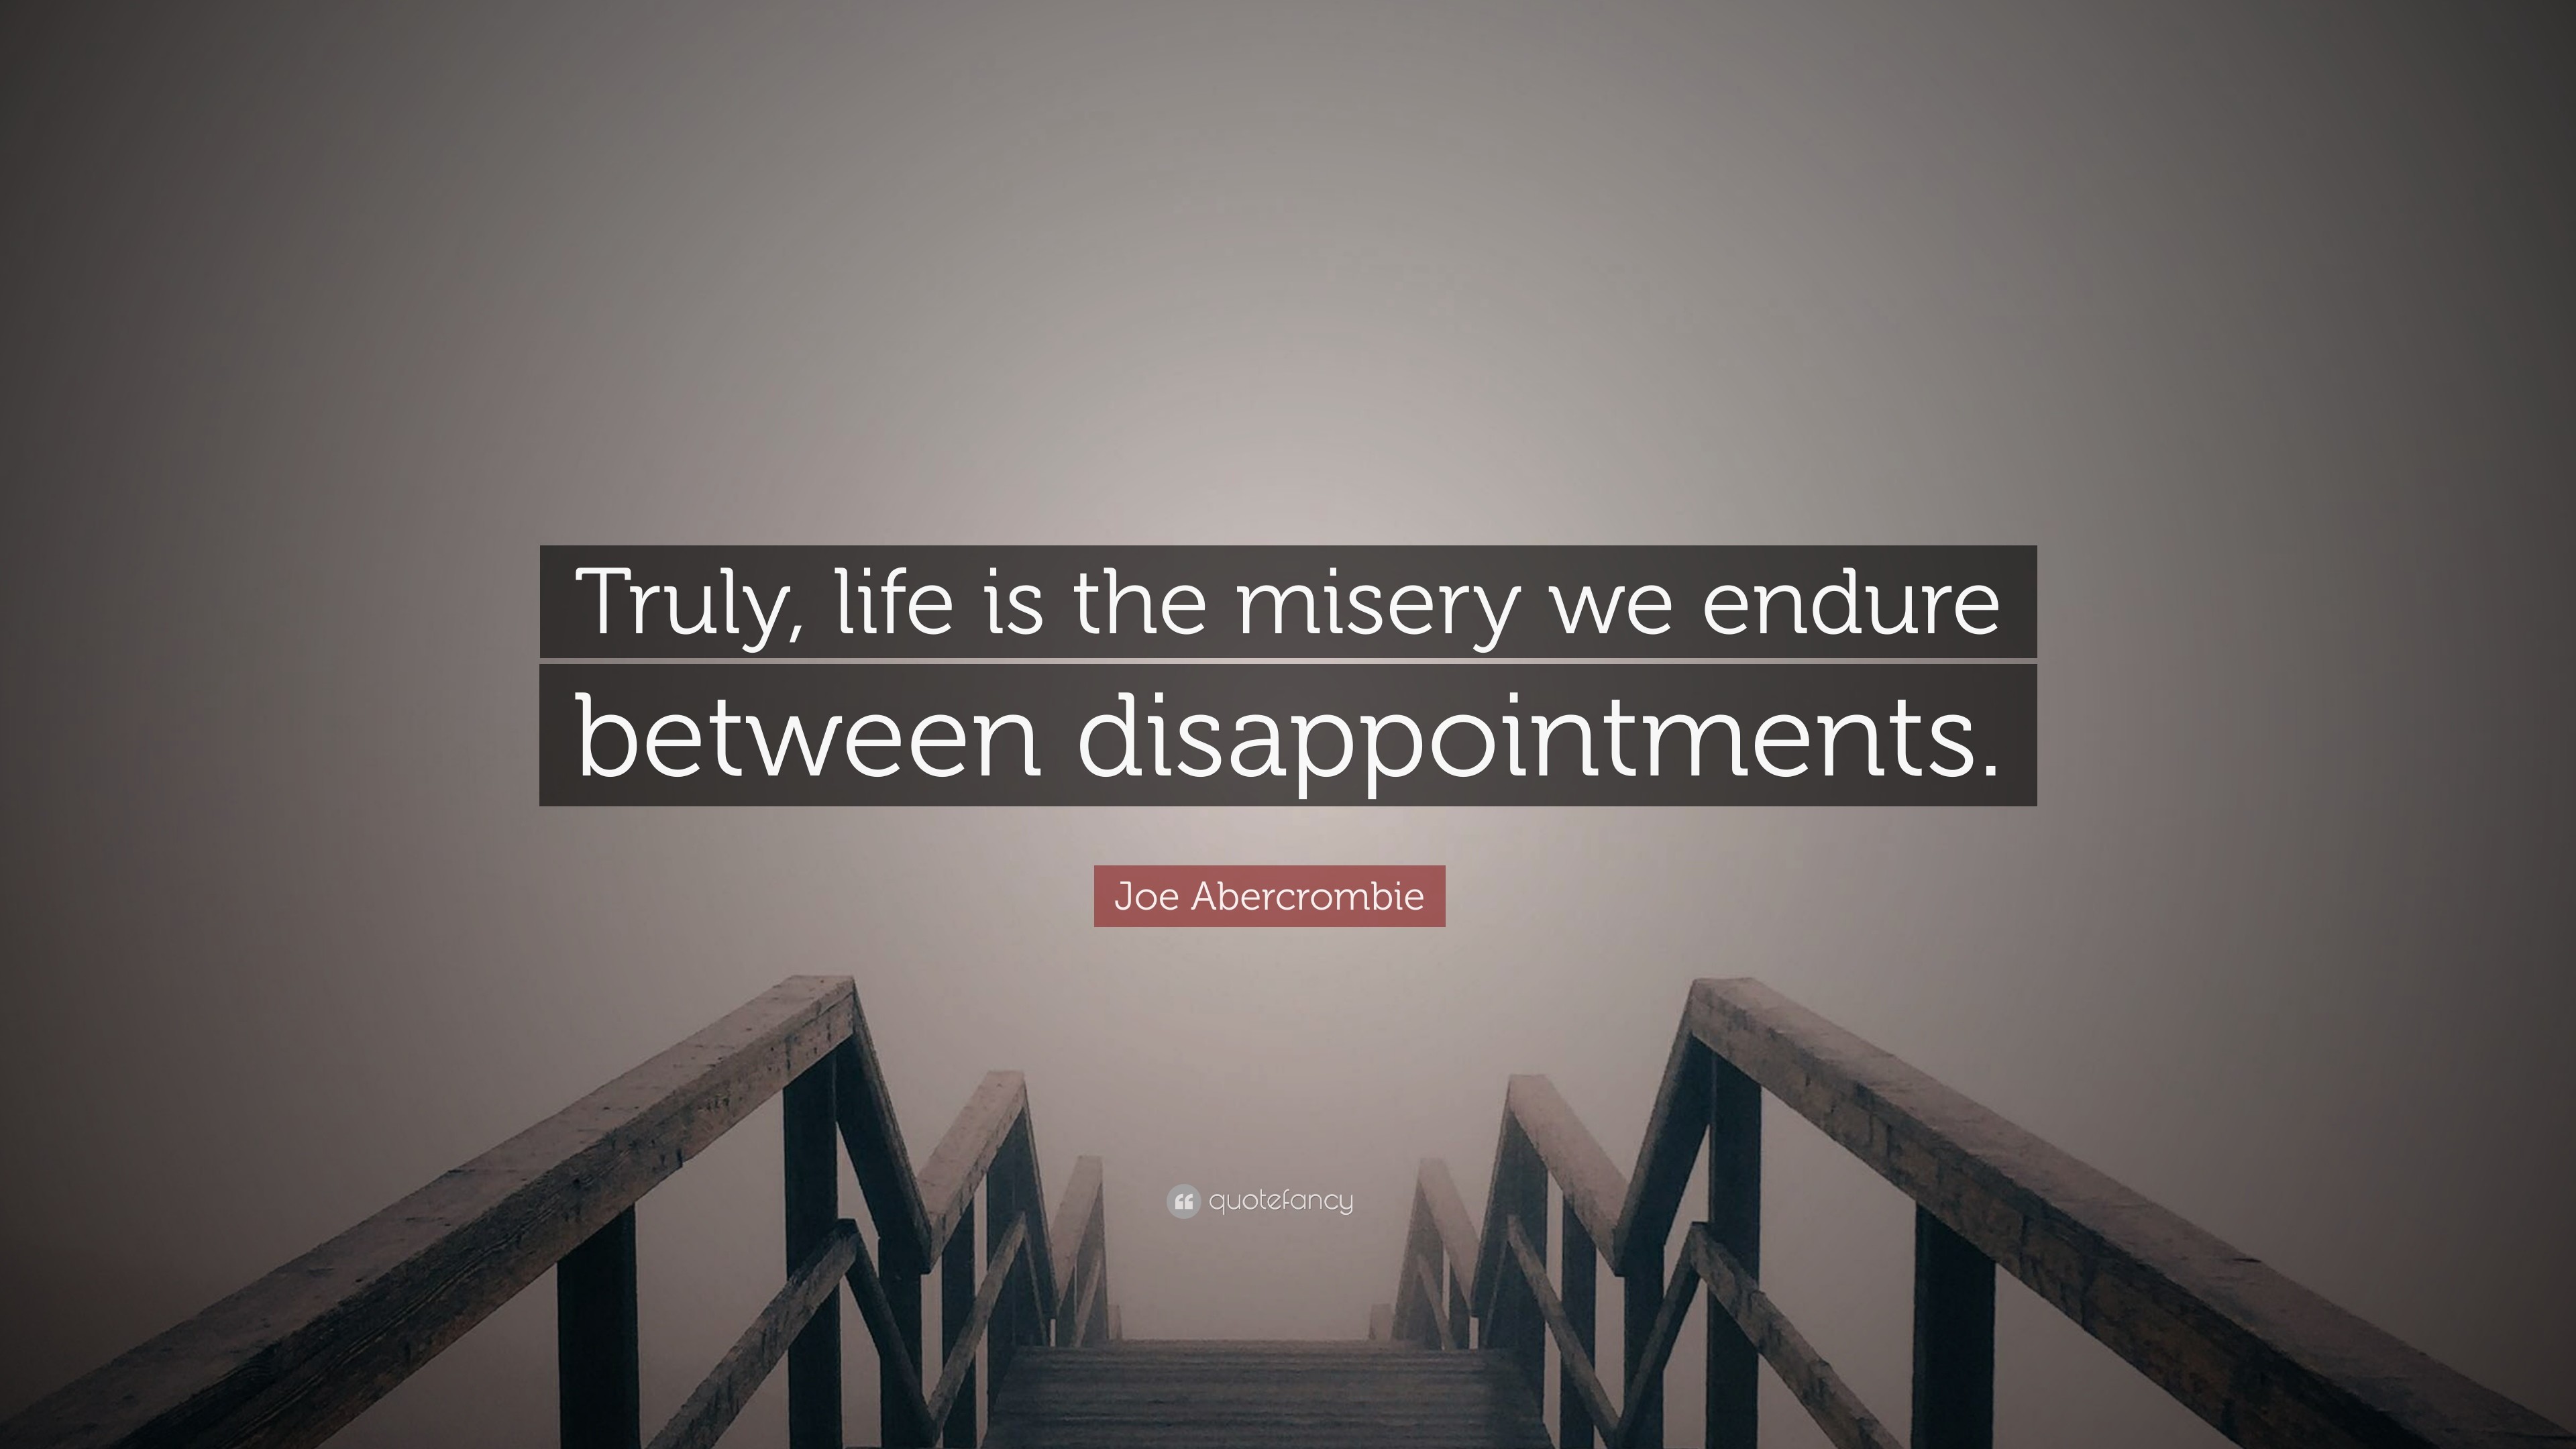 3840x2160 Joe Abercrombie Quote: “Truly, life is the misery we endure between  disappointments.